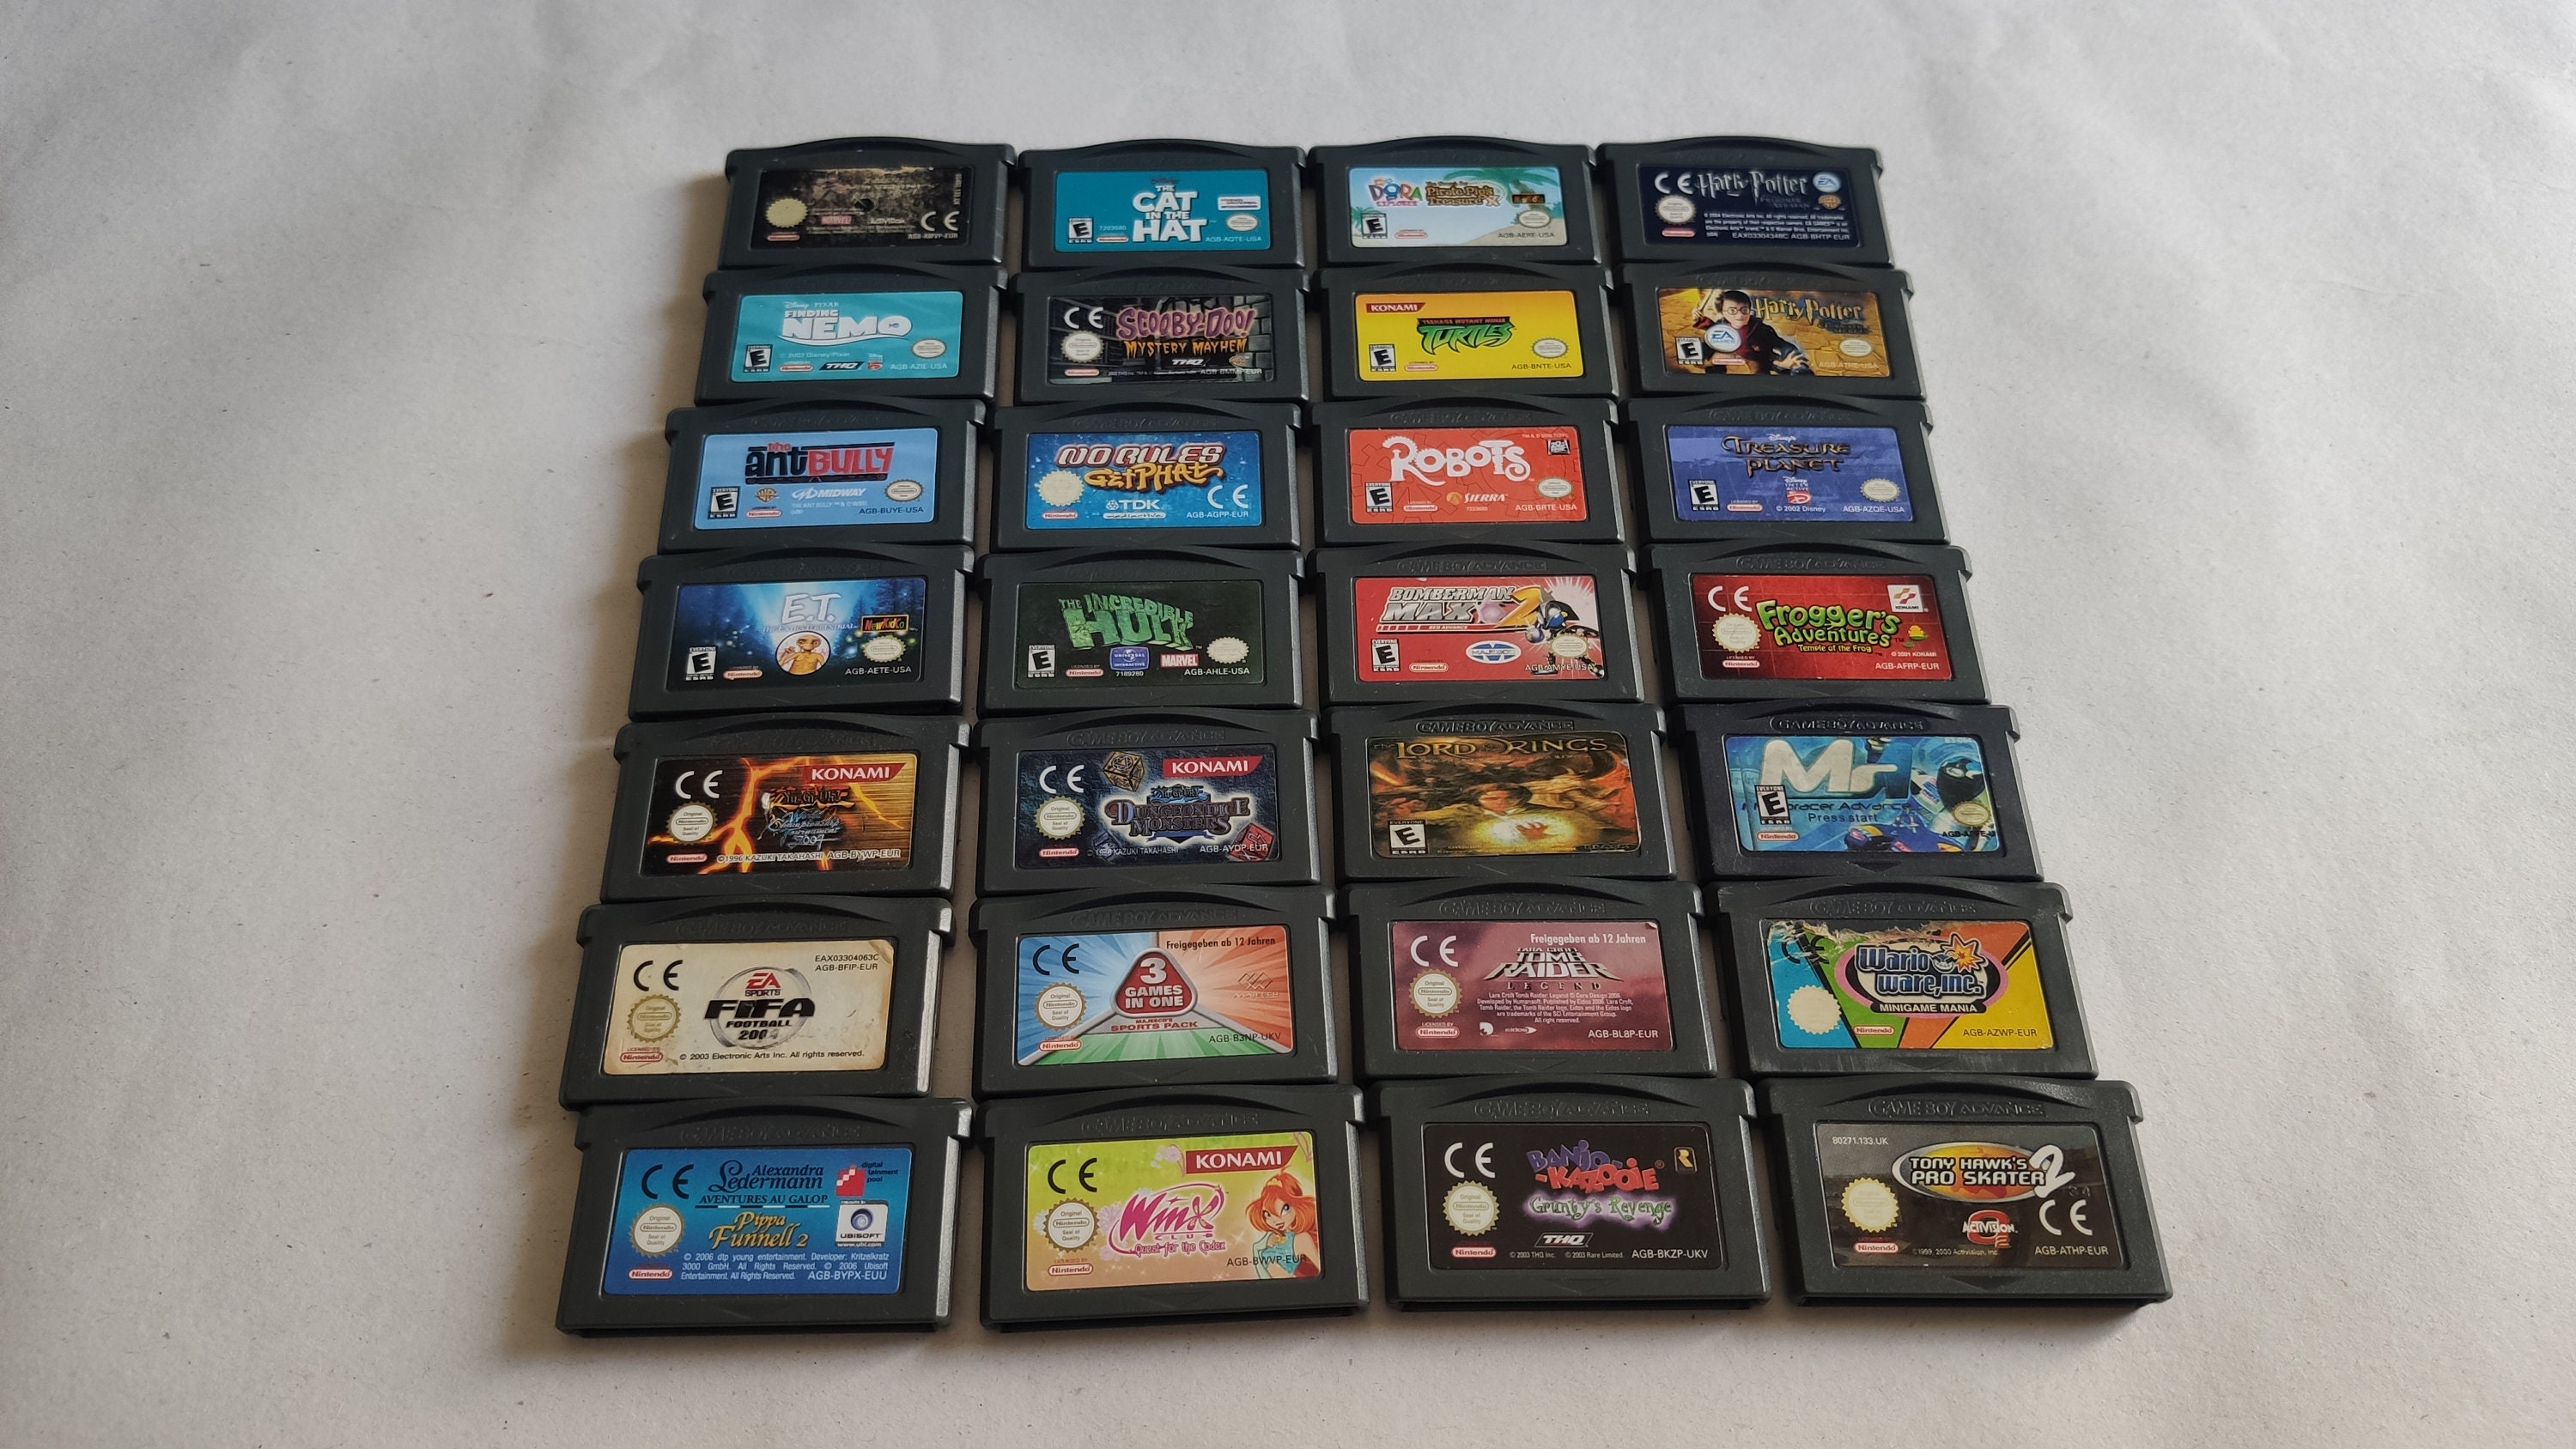 GAMEBOY Advance Classic Games Etsy